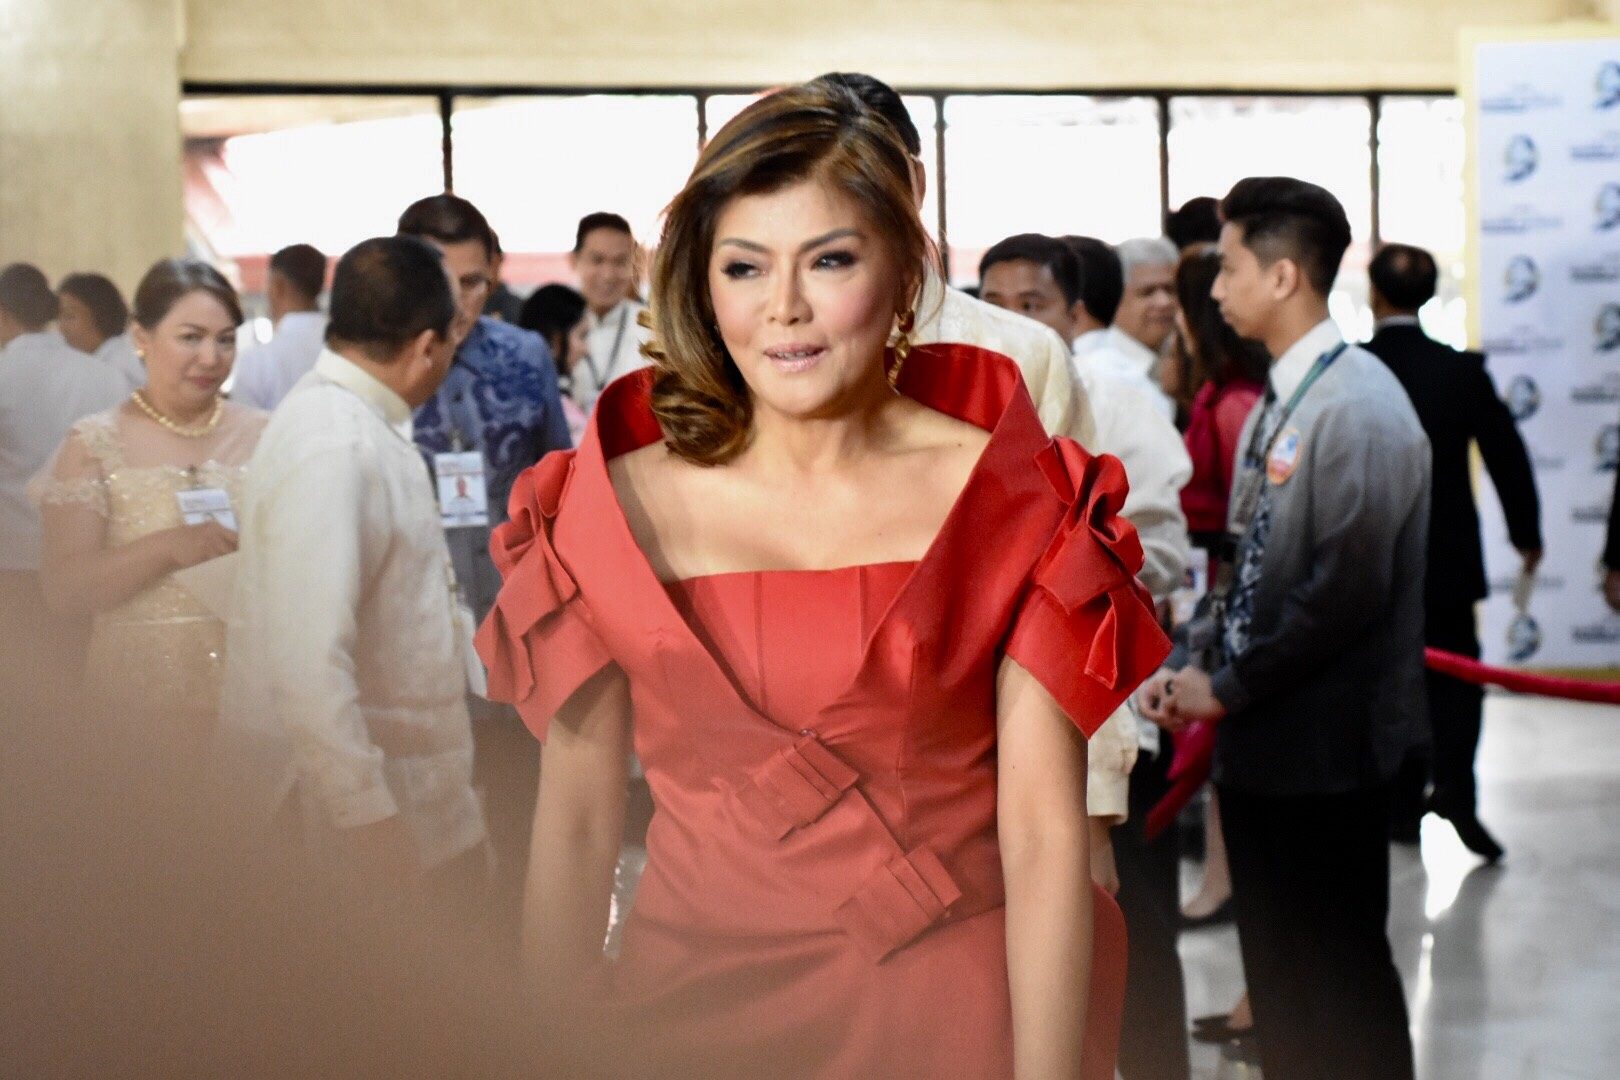 LADY IN RED. Ilocos Norte Governor Imee Marocs walks down the red carpet at the Batasang Pambansa before President Rodrigo Duterte's 3rd State of the Nation Address. Photo by Angie de Silva/Rappler      